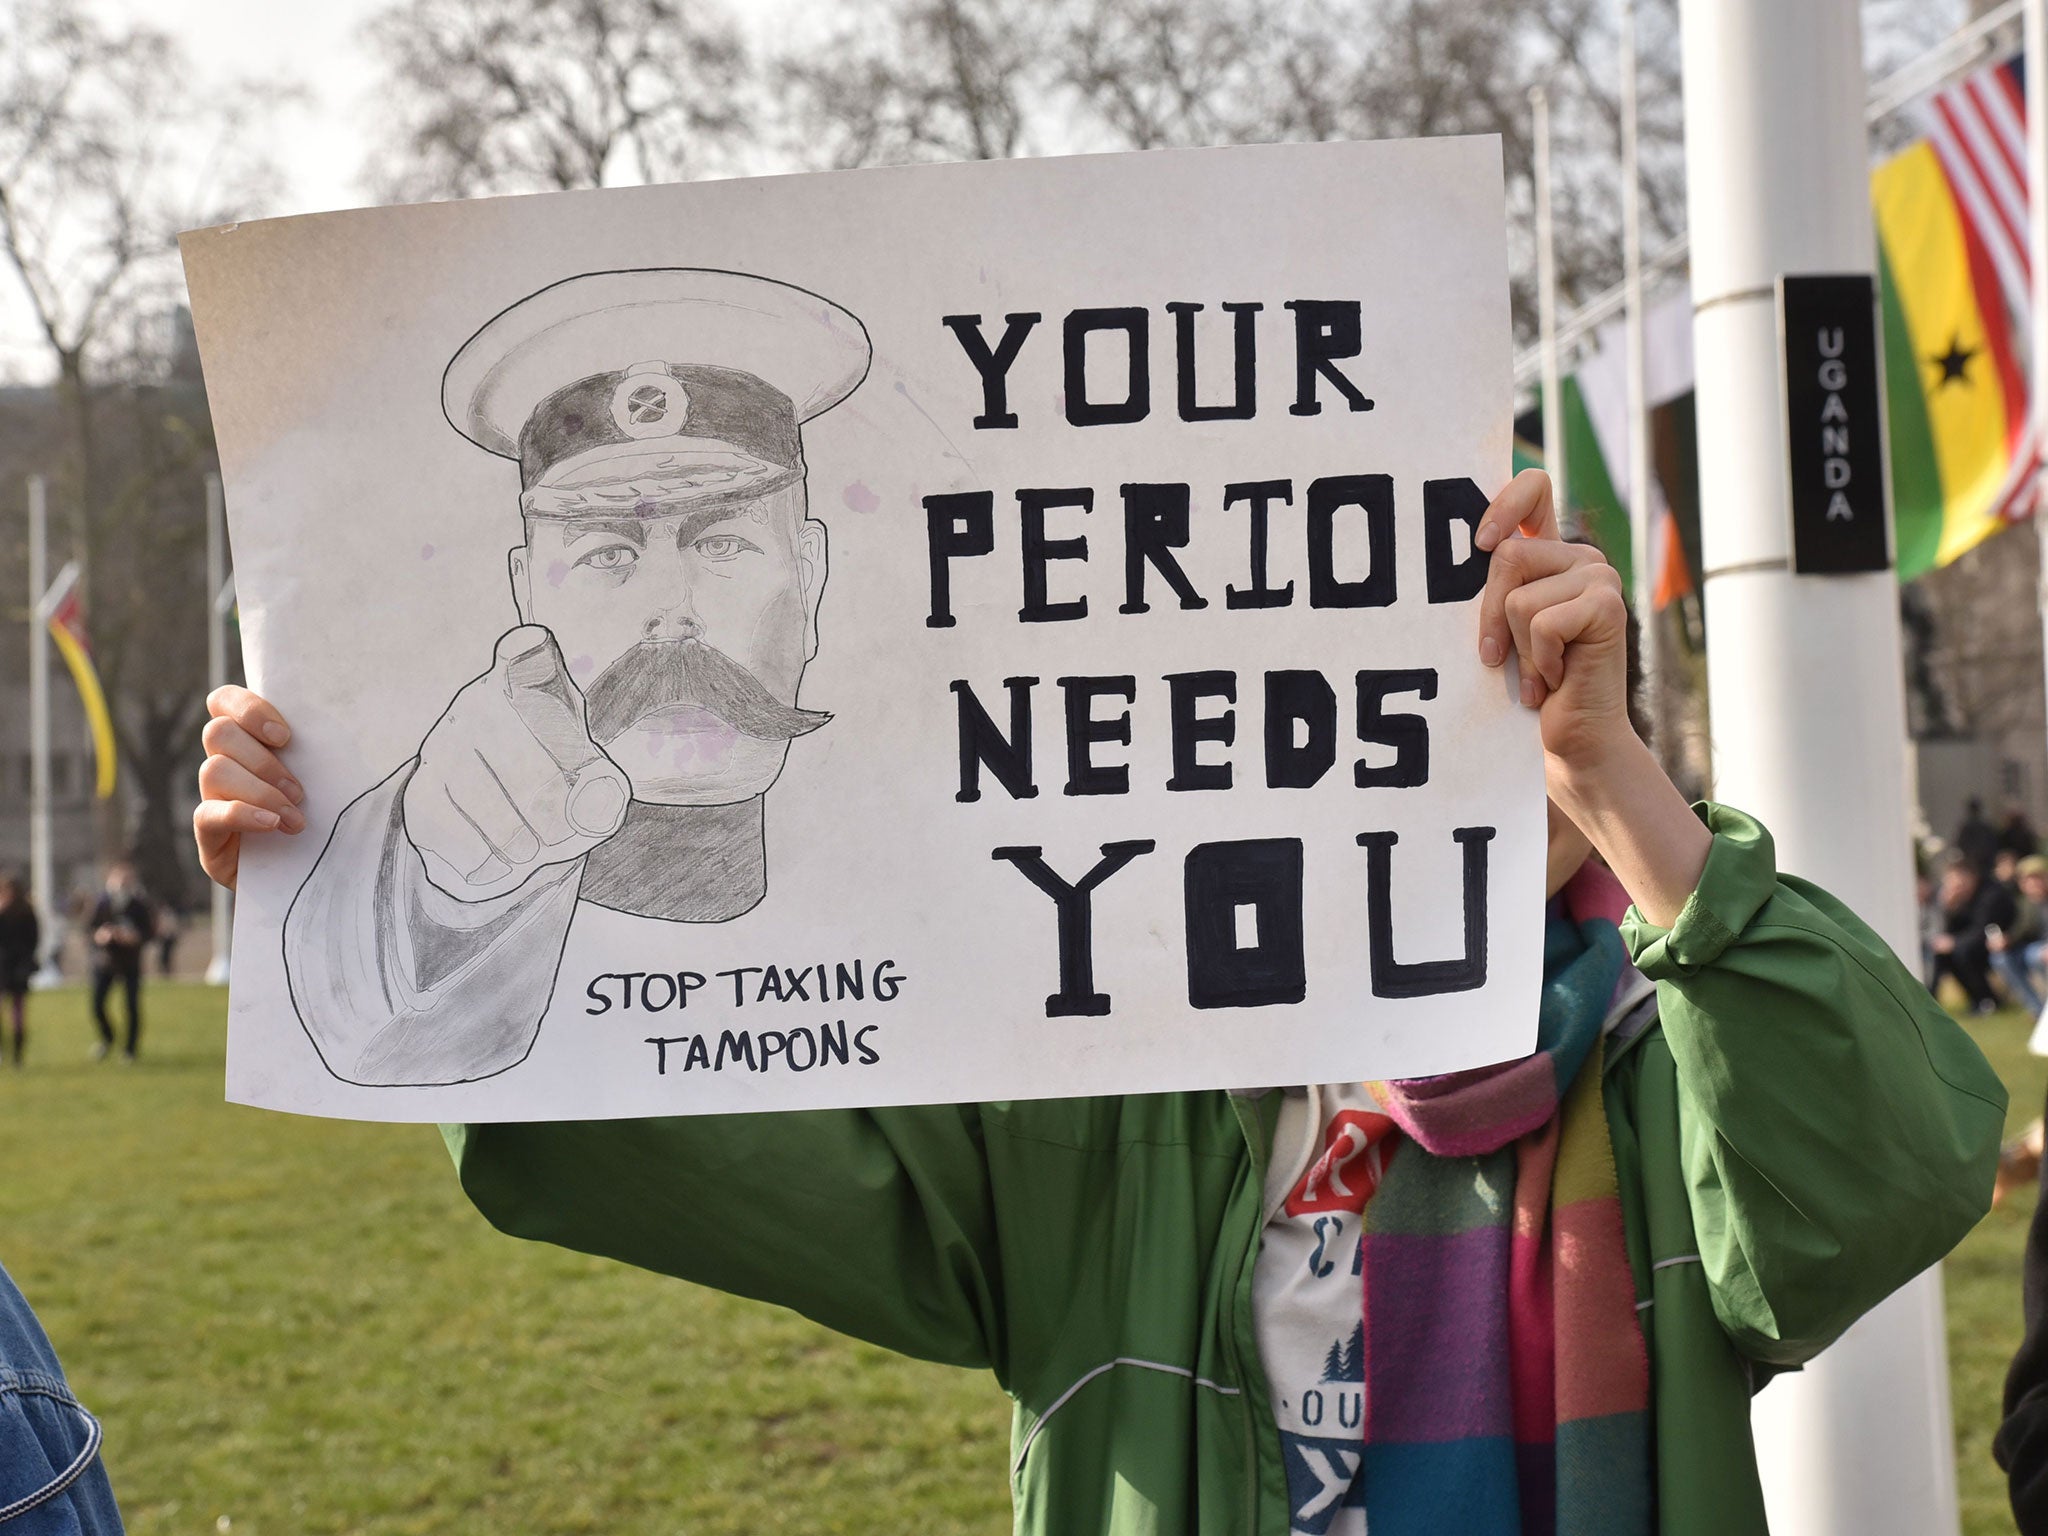 In March protesters demonstrated outside Parliament against the so-called 'tampon tax'